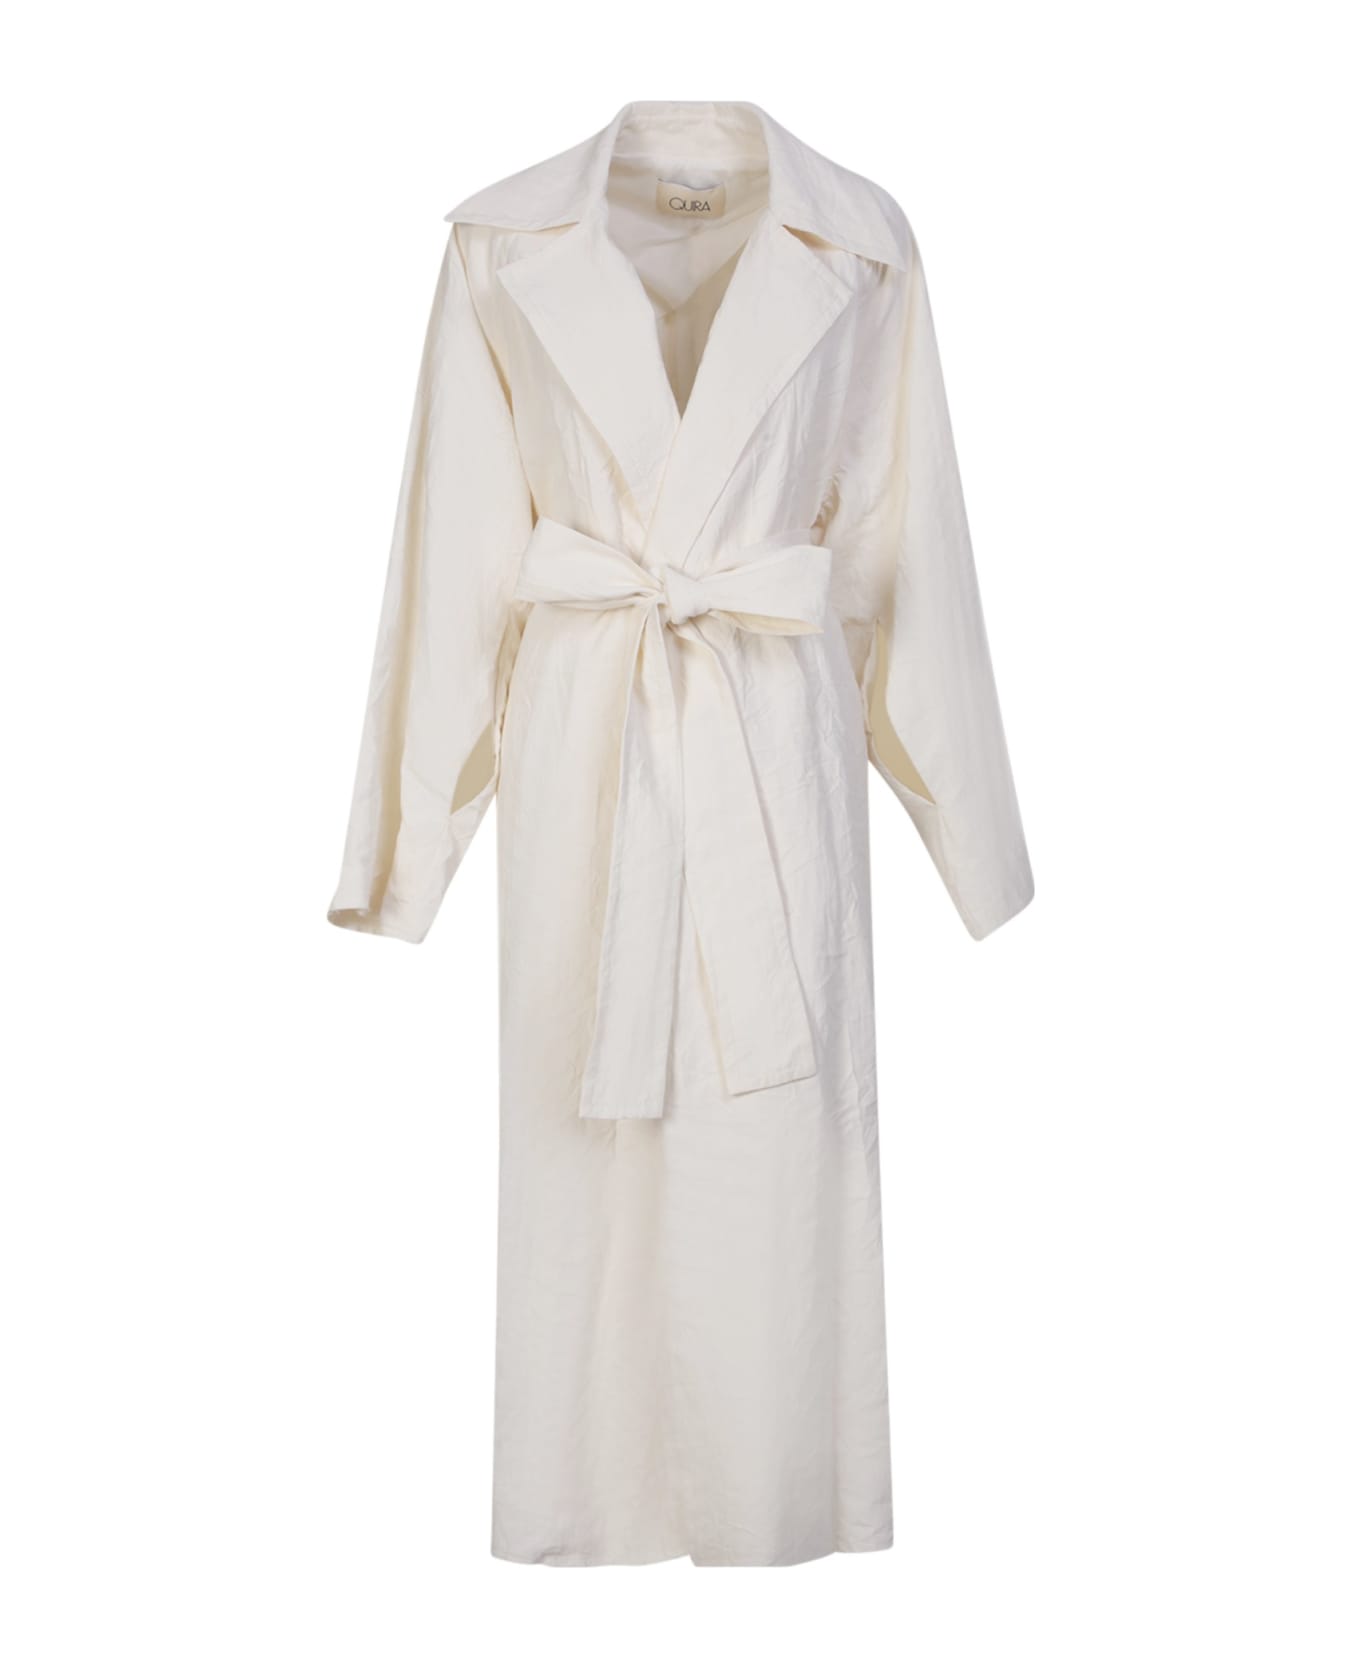 Quira White Double-breasted Coat - White